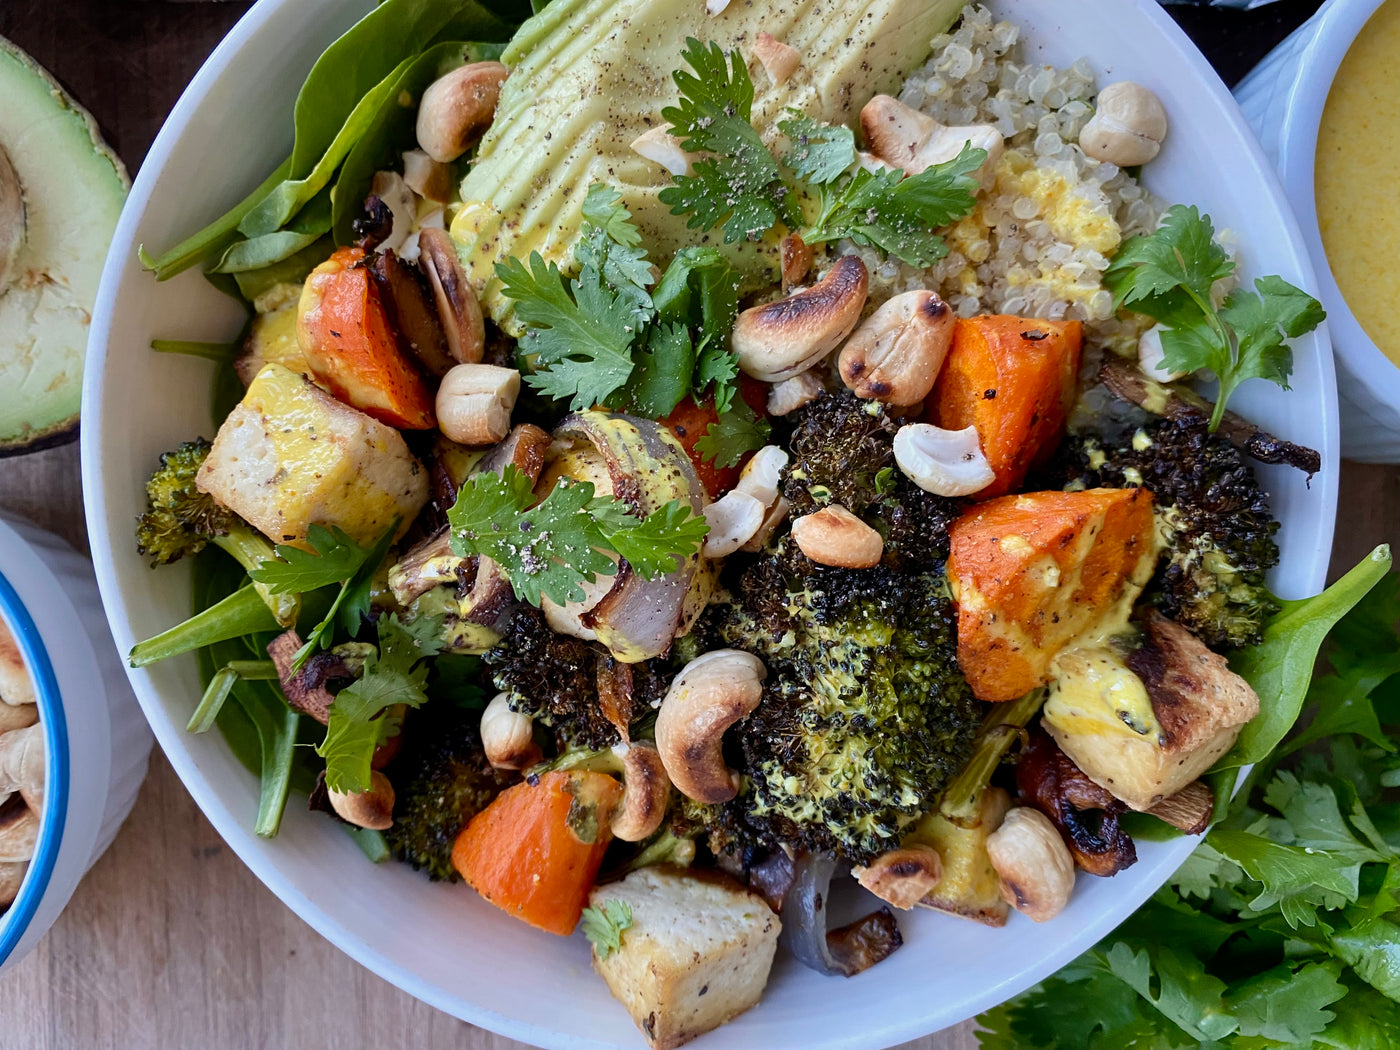 Roasted Tofu, Vegetables & Quinoa Cashew Bowl with Ginger Turmeric Miso Sauce